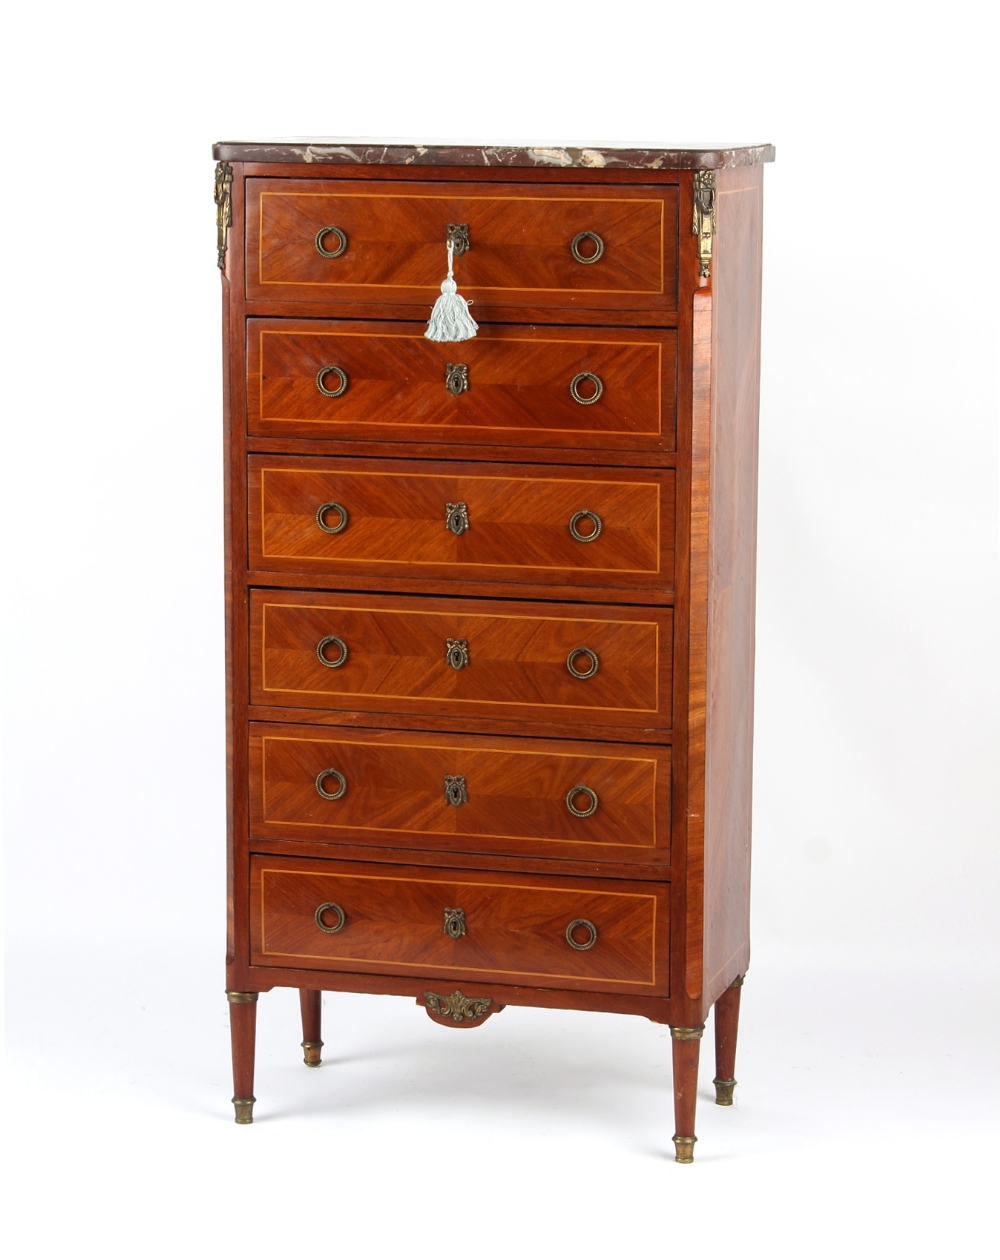 Property of a gentleman - a late 19th / early 20th century French Louis XVI style semainier or chest